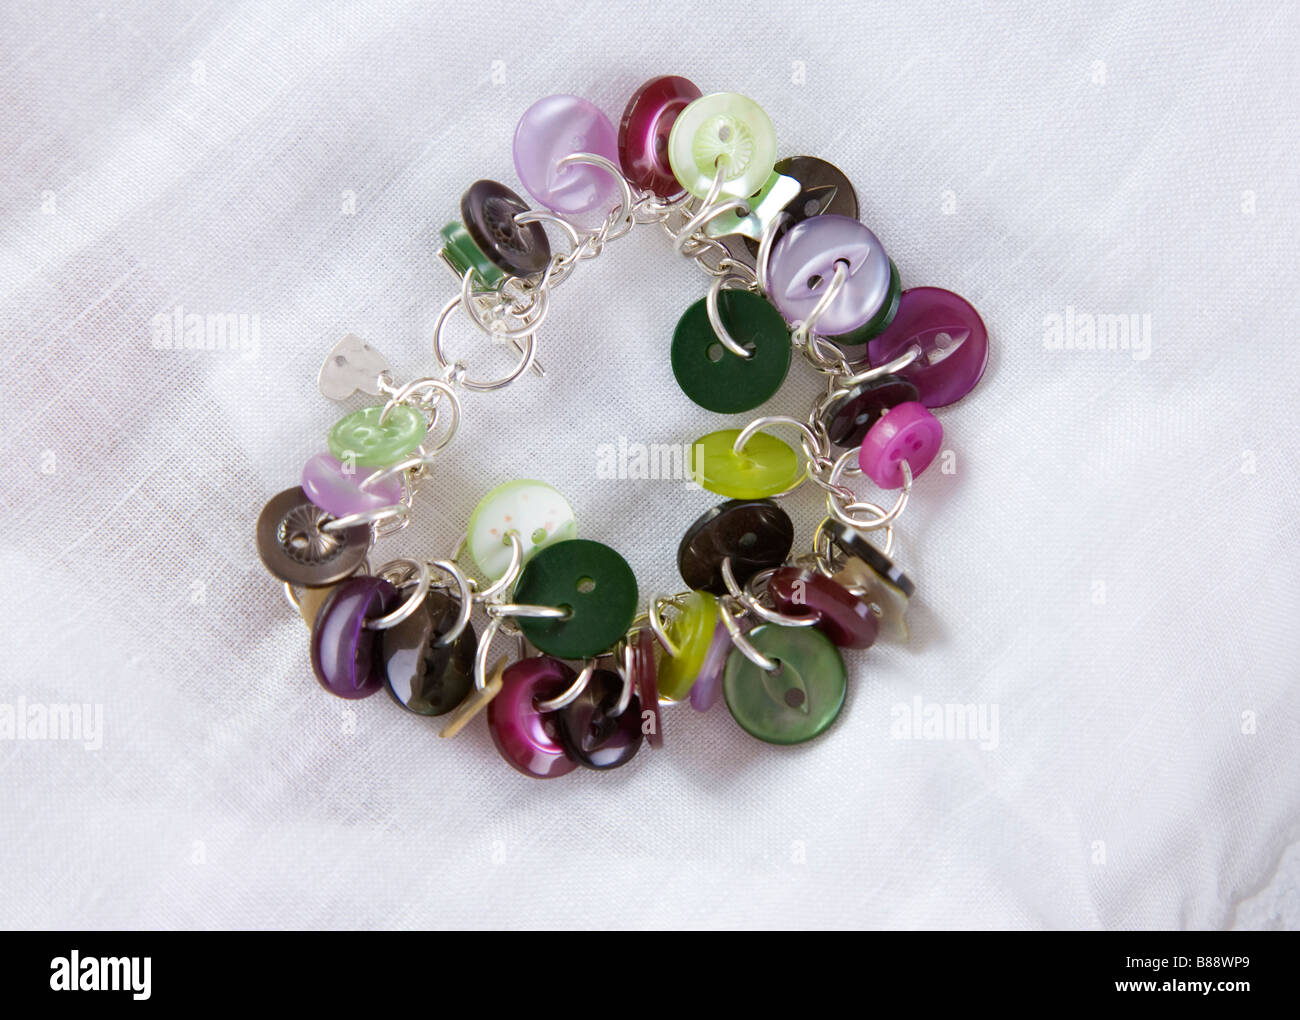 low cost jewellery made with buttons and silver plated links Stock Photo